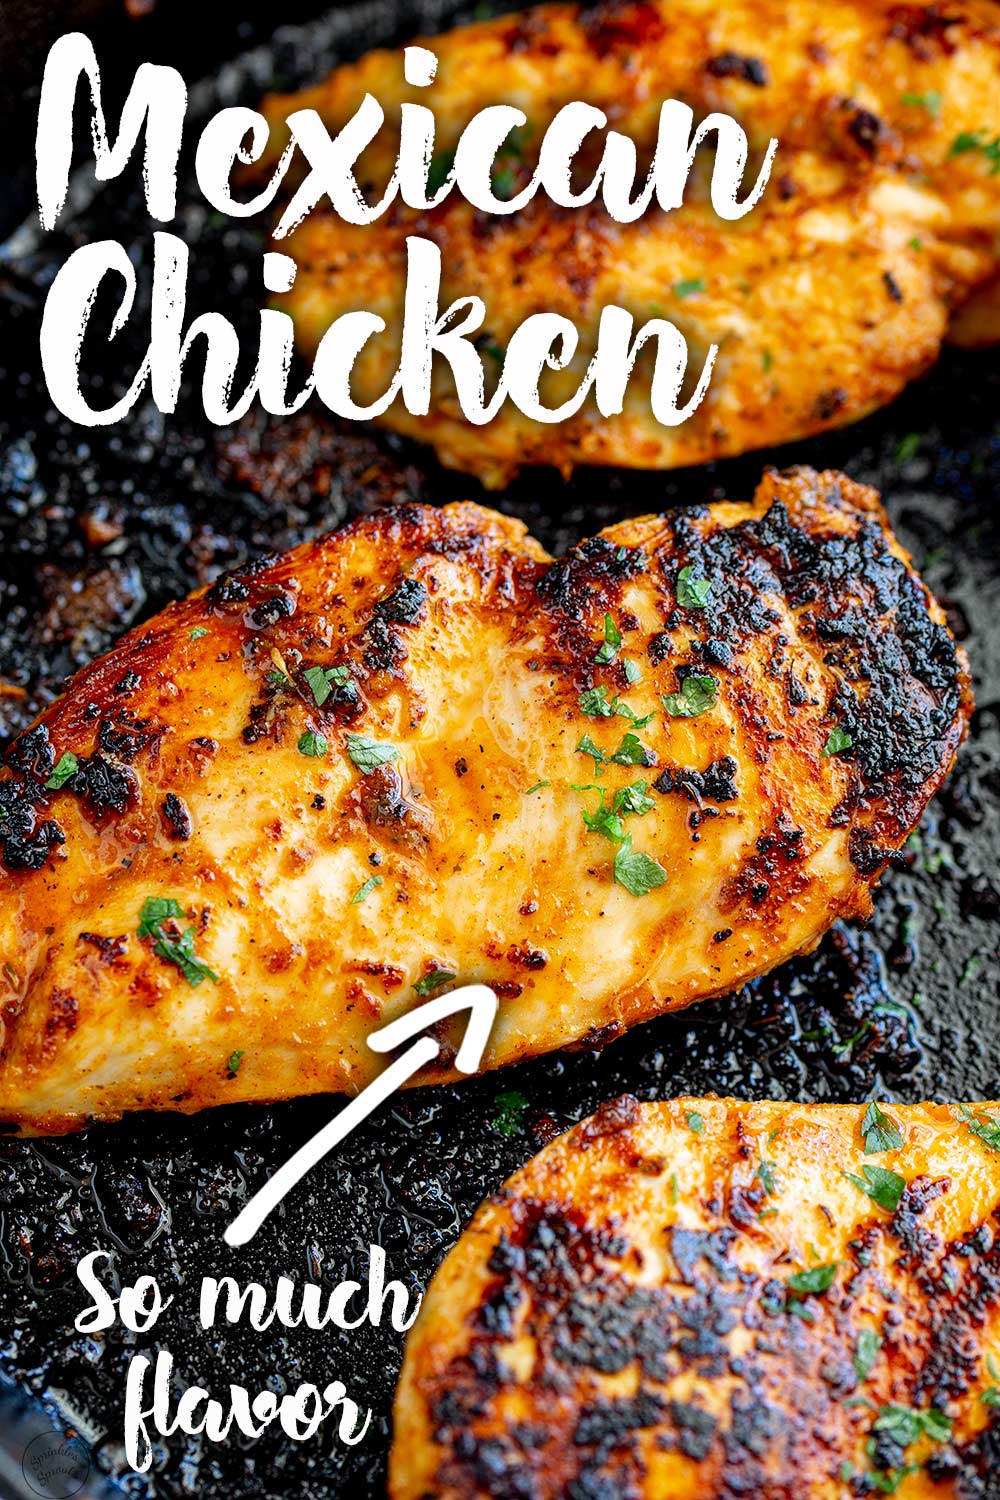 PINTEREST IMAGE - Mexican chicken breast with text overlay